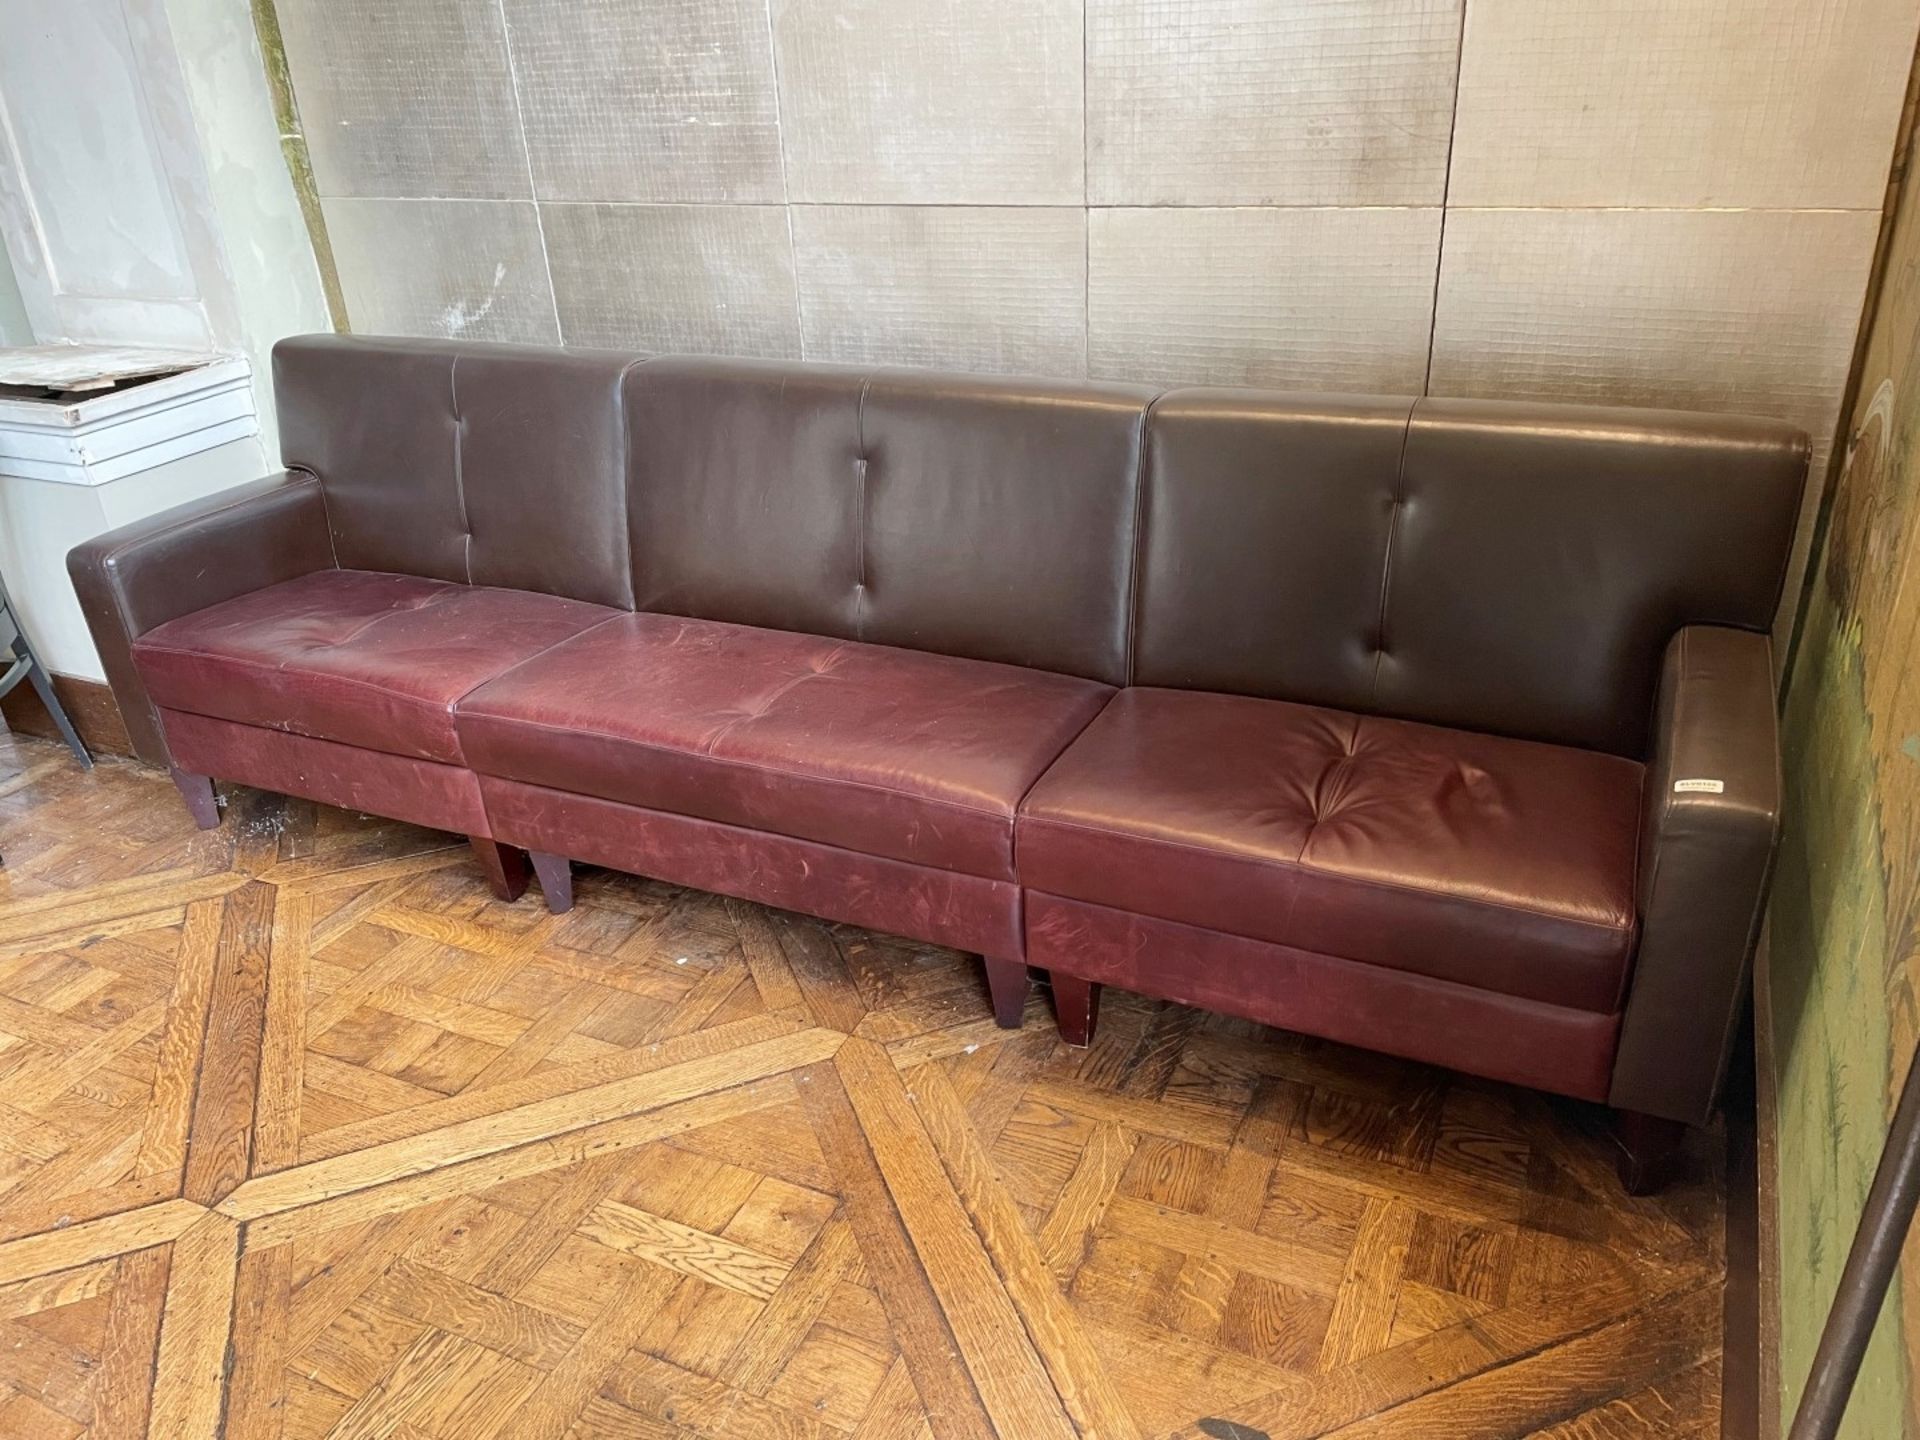 1 x Leather Upholstered Banquet Seating Bench In Brown And Red - Ref: BLVD105 - CL649 - Location: